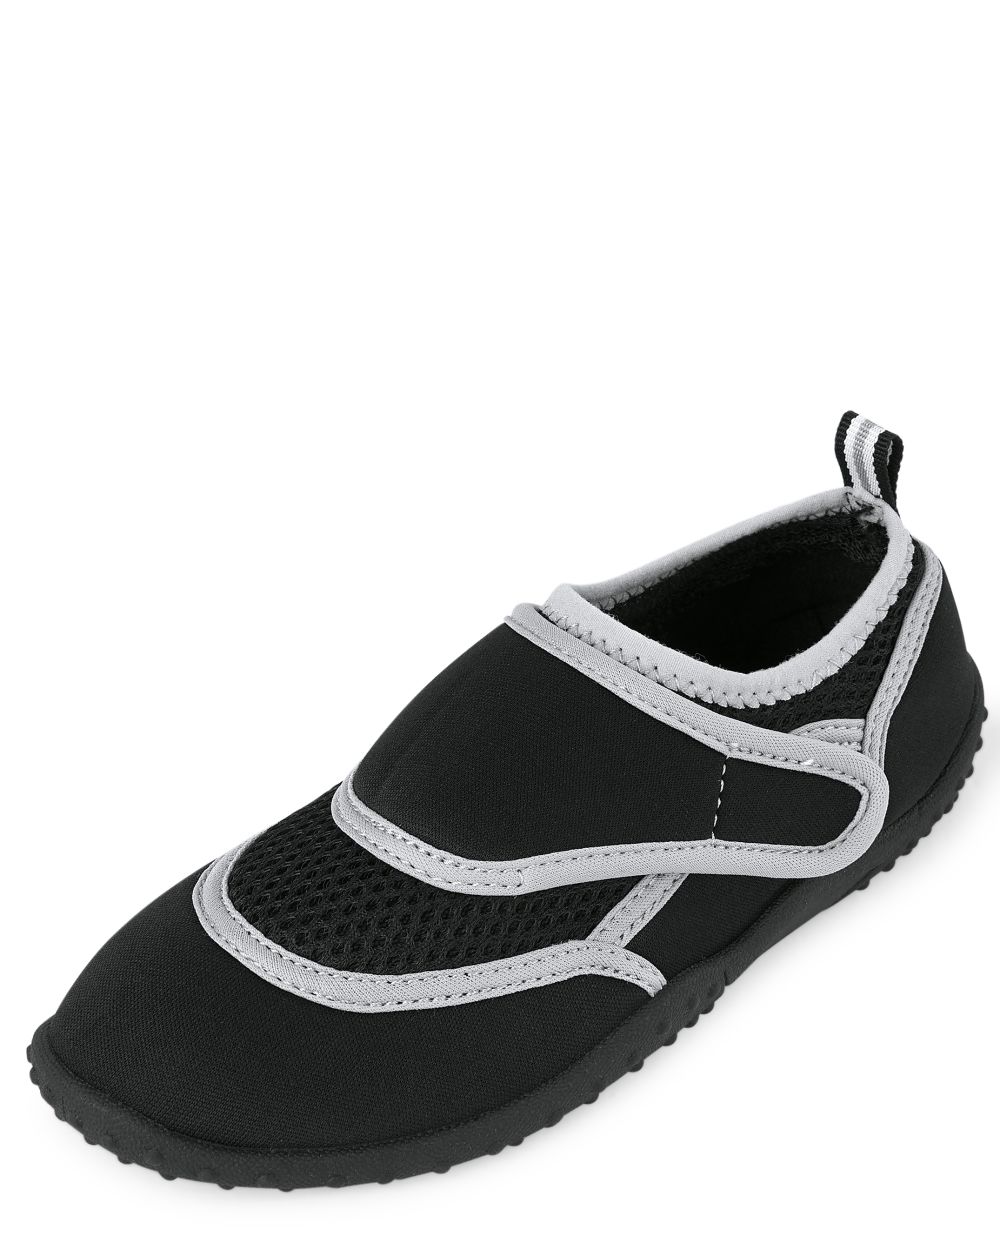 

s Boys Water Shoes - Black - The Children's Place